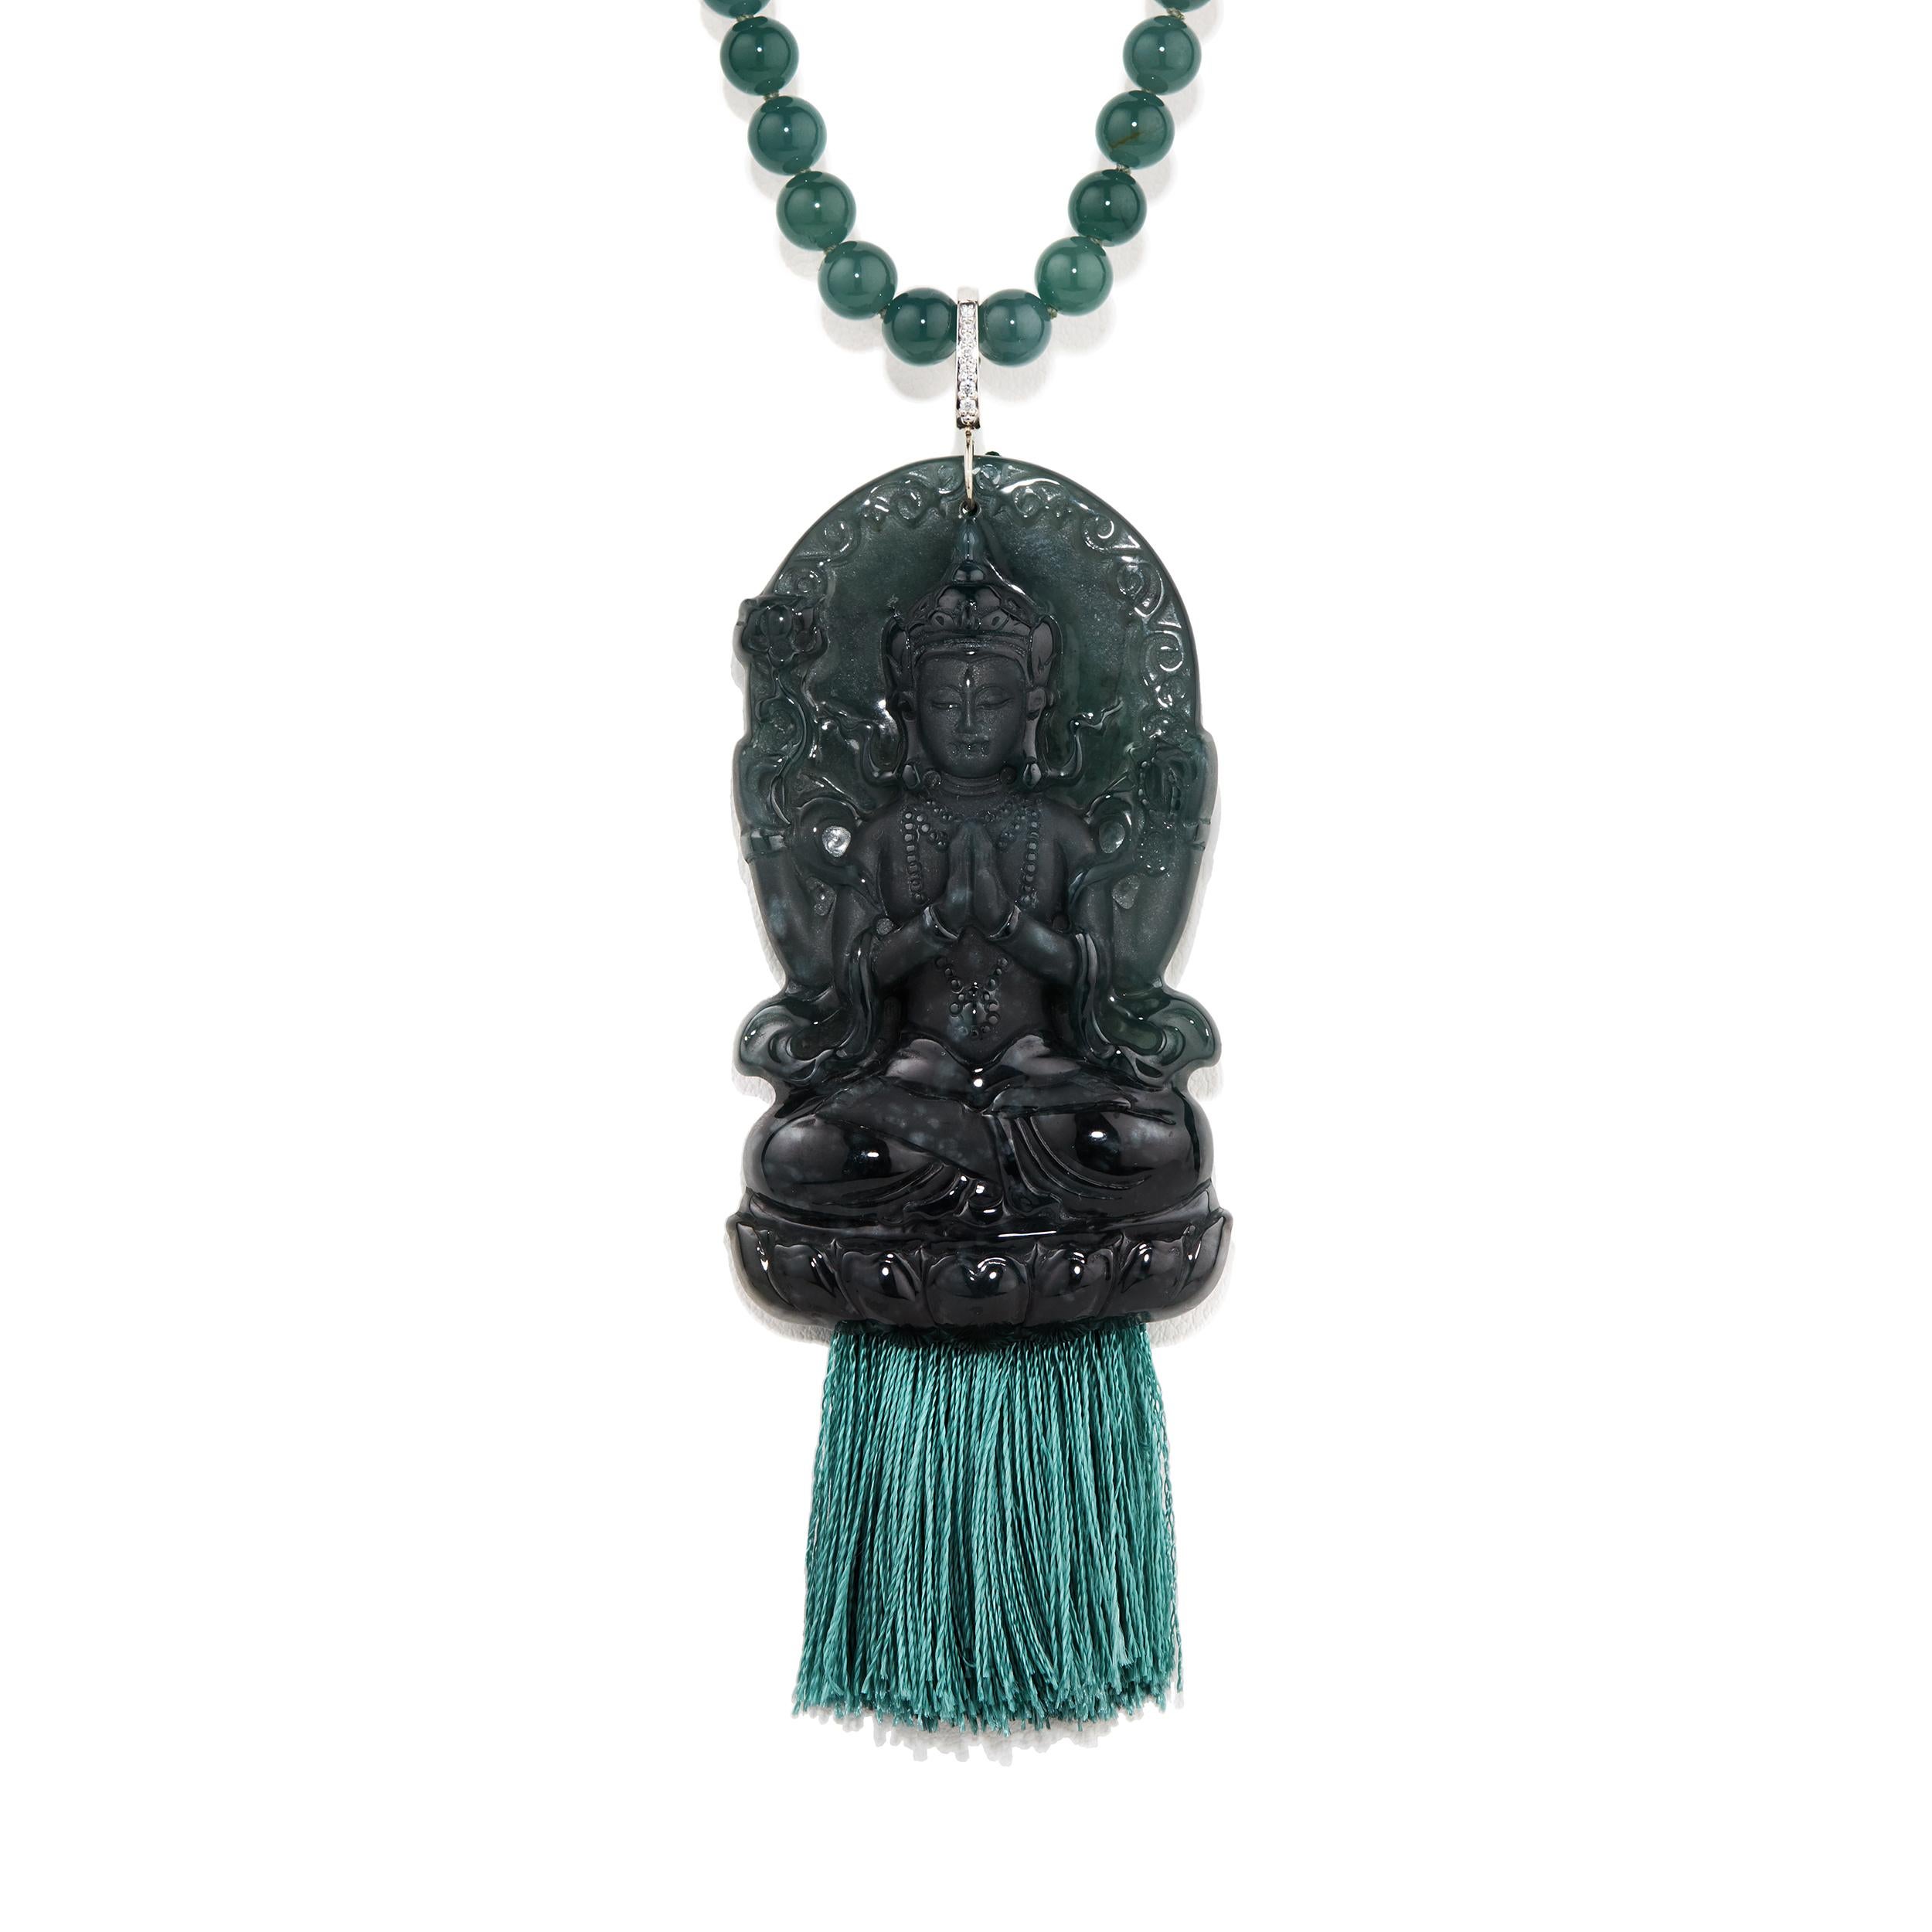 The only place you will find Fine Jewelry Mala Necklaces, used for prayer and meditation practices. Some people even call them Yoga Necklaces to connote a lifestyle of intentional living. Kiersten Elizabeth uses all gemstone materials and